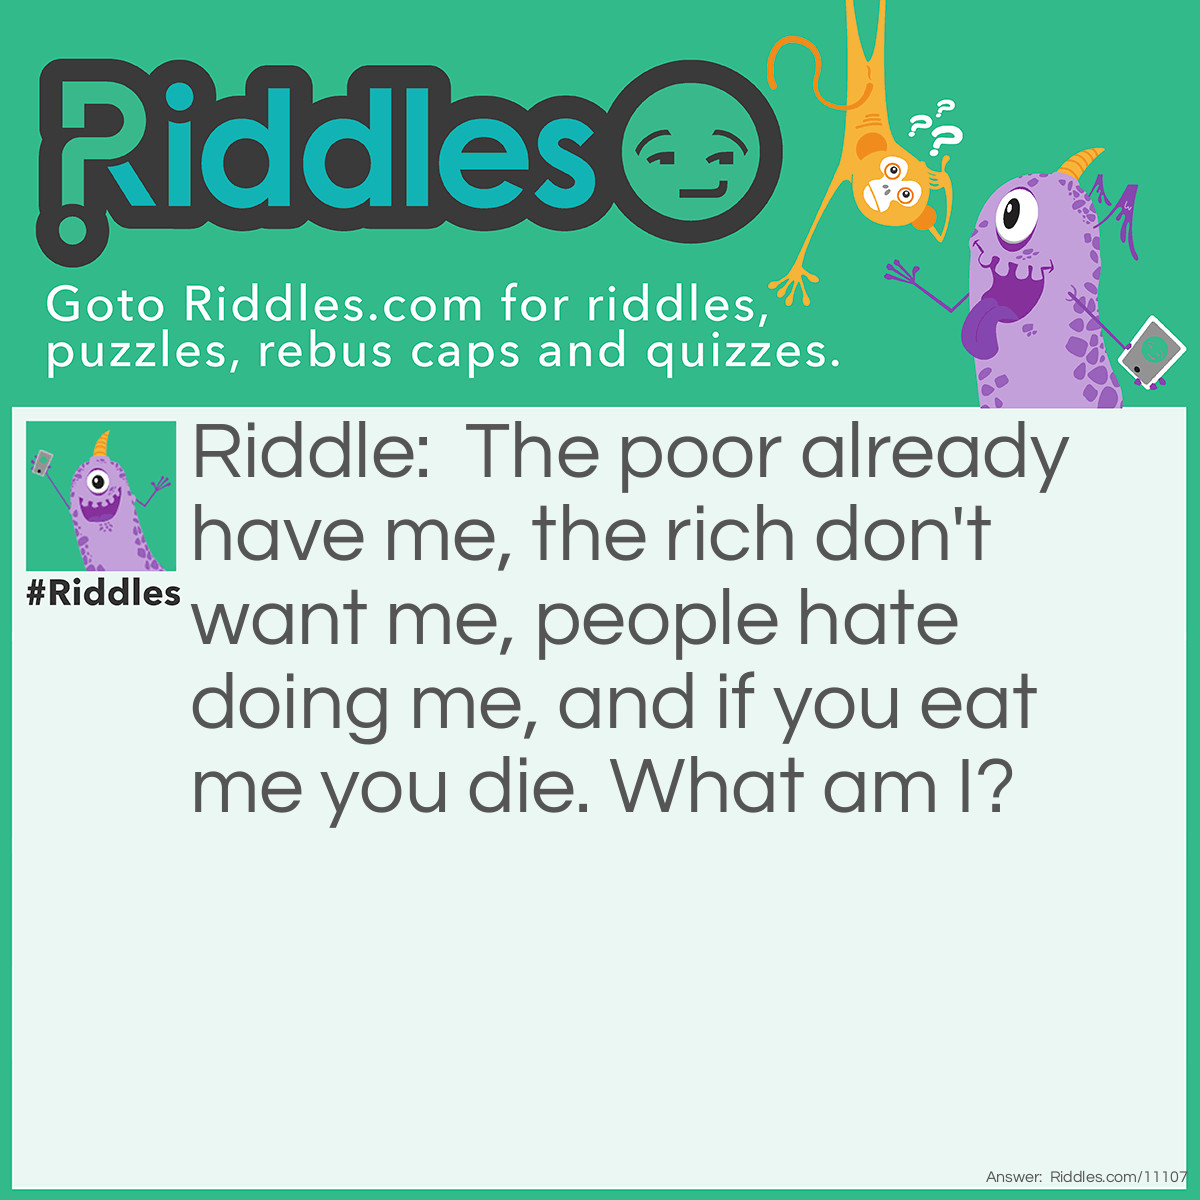 Riddle: The poor already have me, the rich don't want me, people hate doing me, and if you eat me you die. What am I? Answer: Nothing